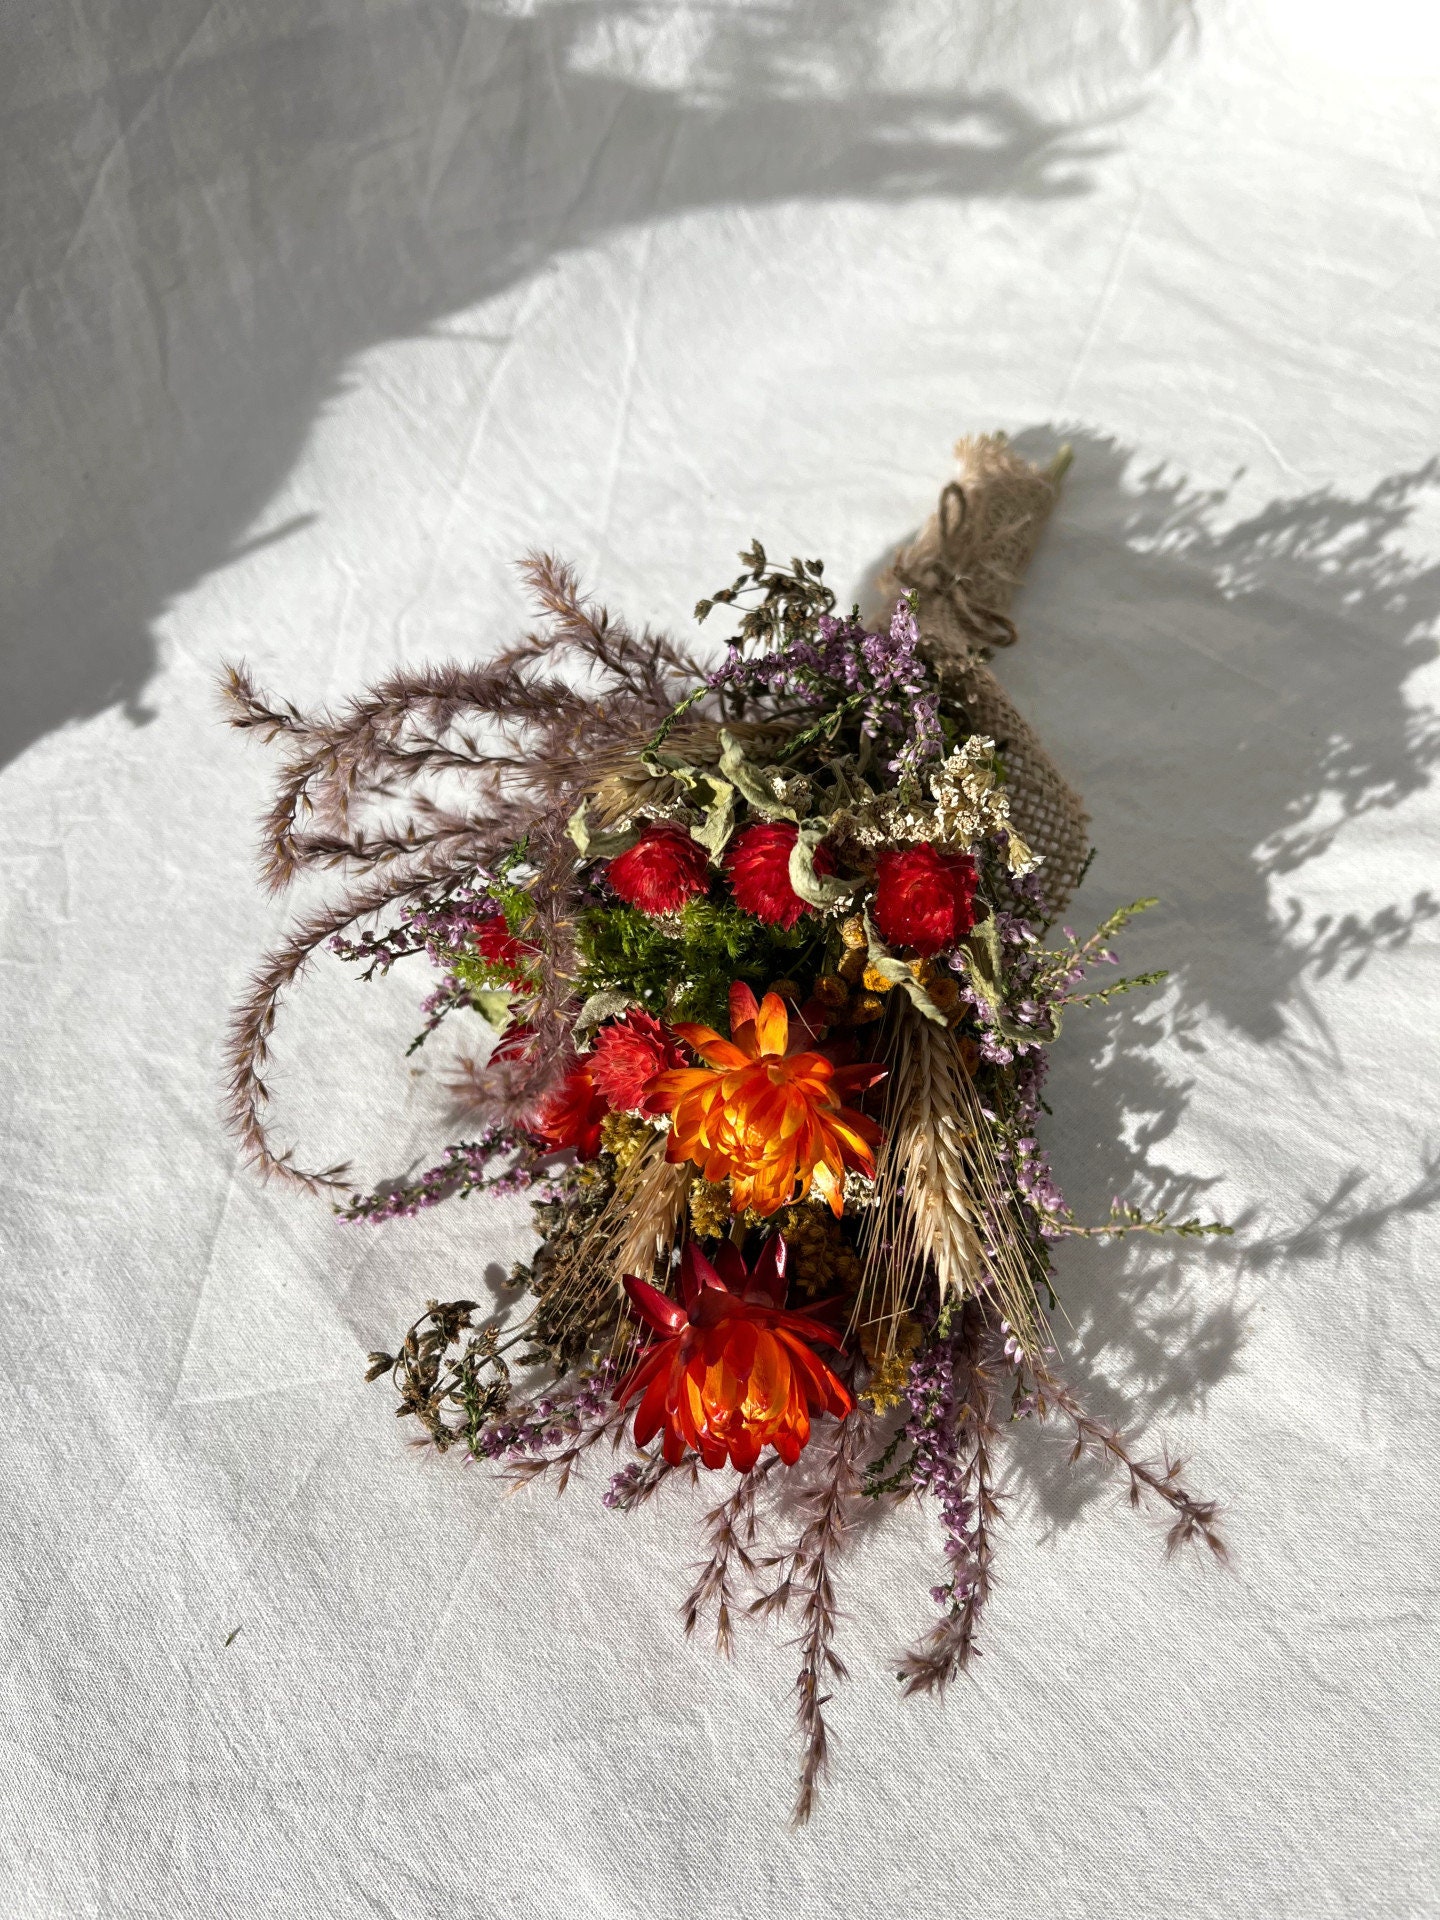 Dried Flowers - Where To Buy Dried Flower Bouquets & Arrangement Tips